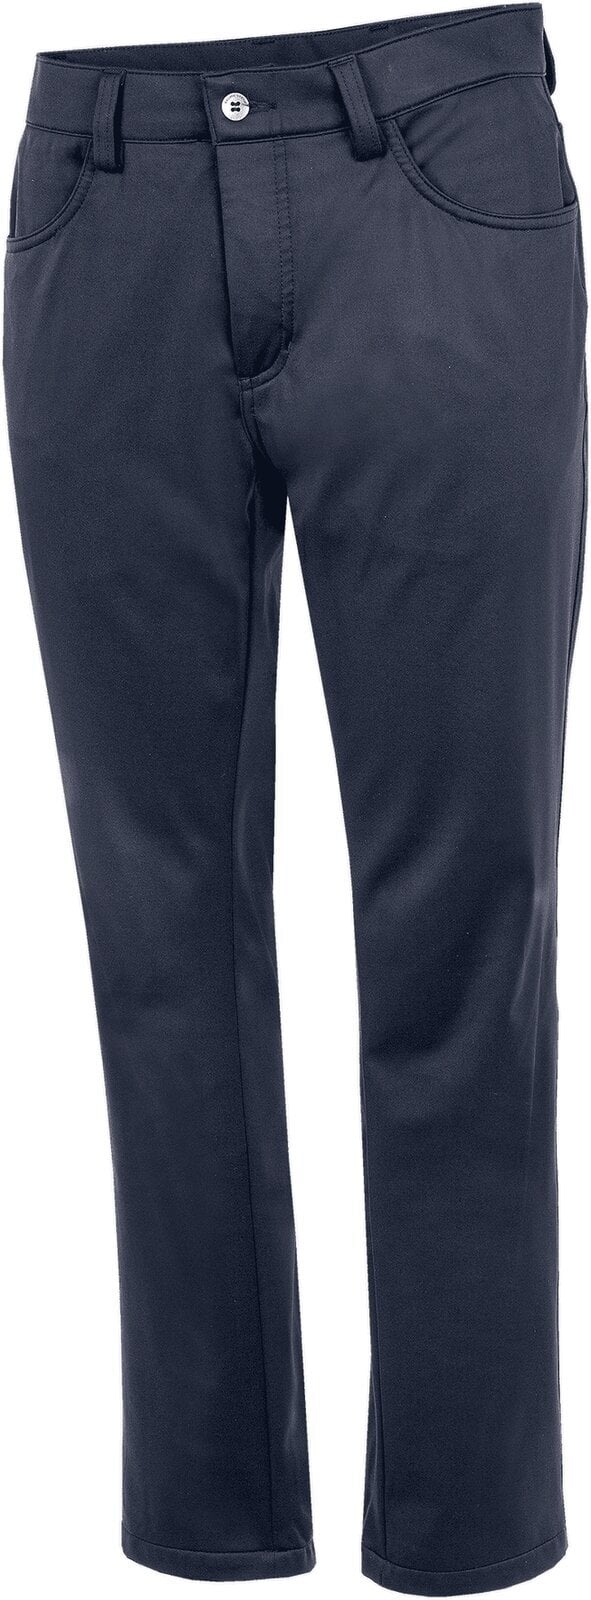 Trousers Galvin Green Lane MensWindproof And Water Repellent Pants Navy 34/32